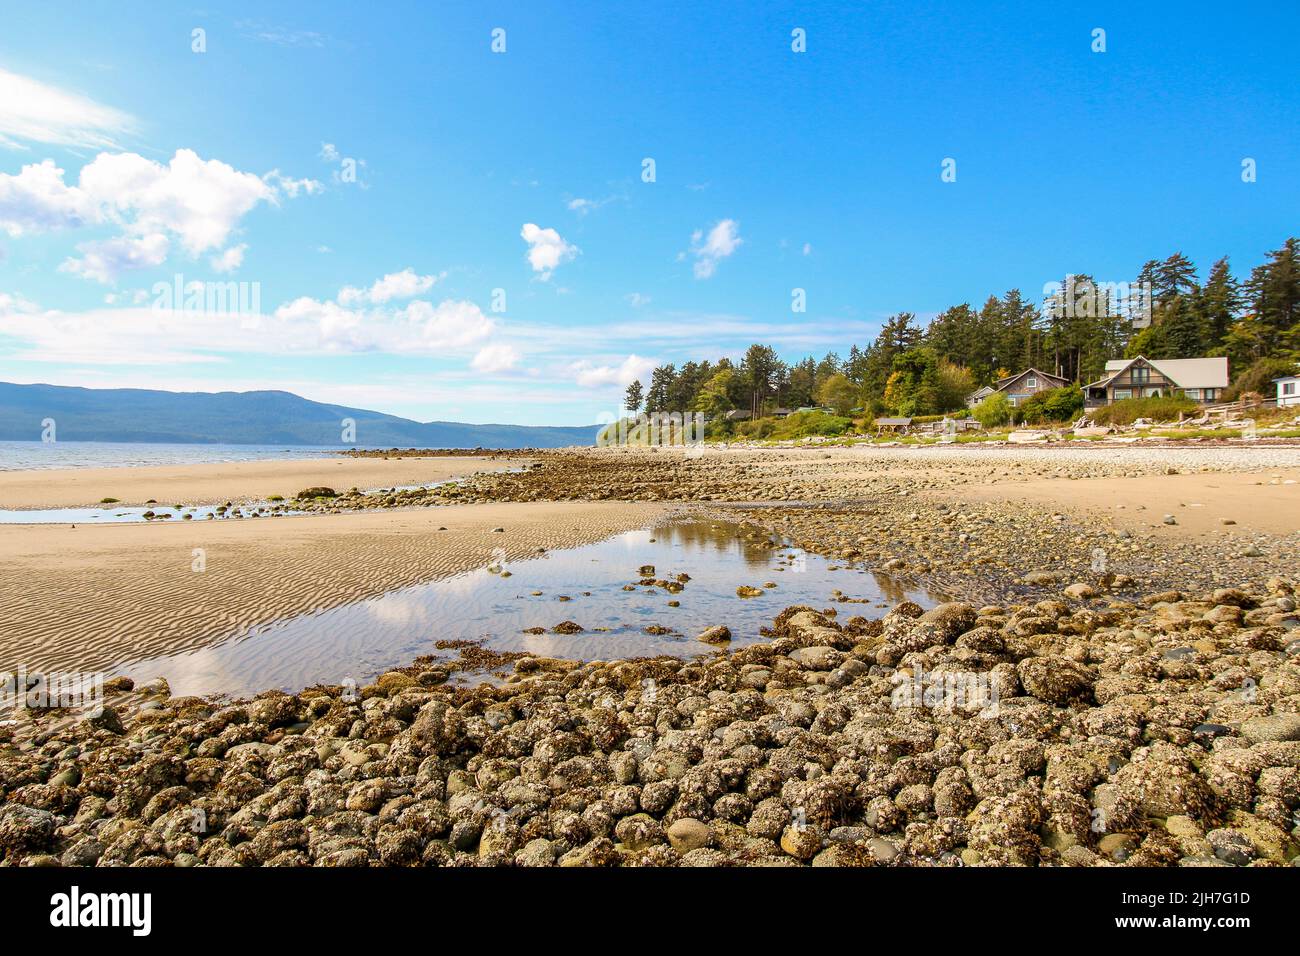 Powell River, BC. The view on the long sandy beach with stones. Houses and trees in the background. Stock Photo